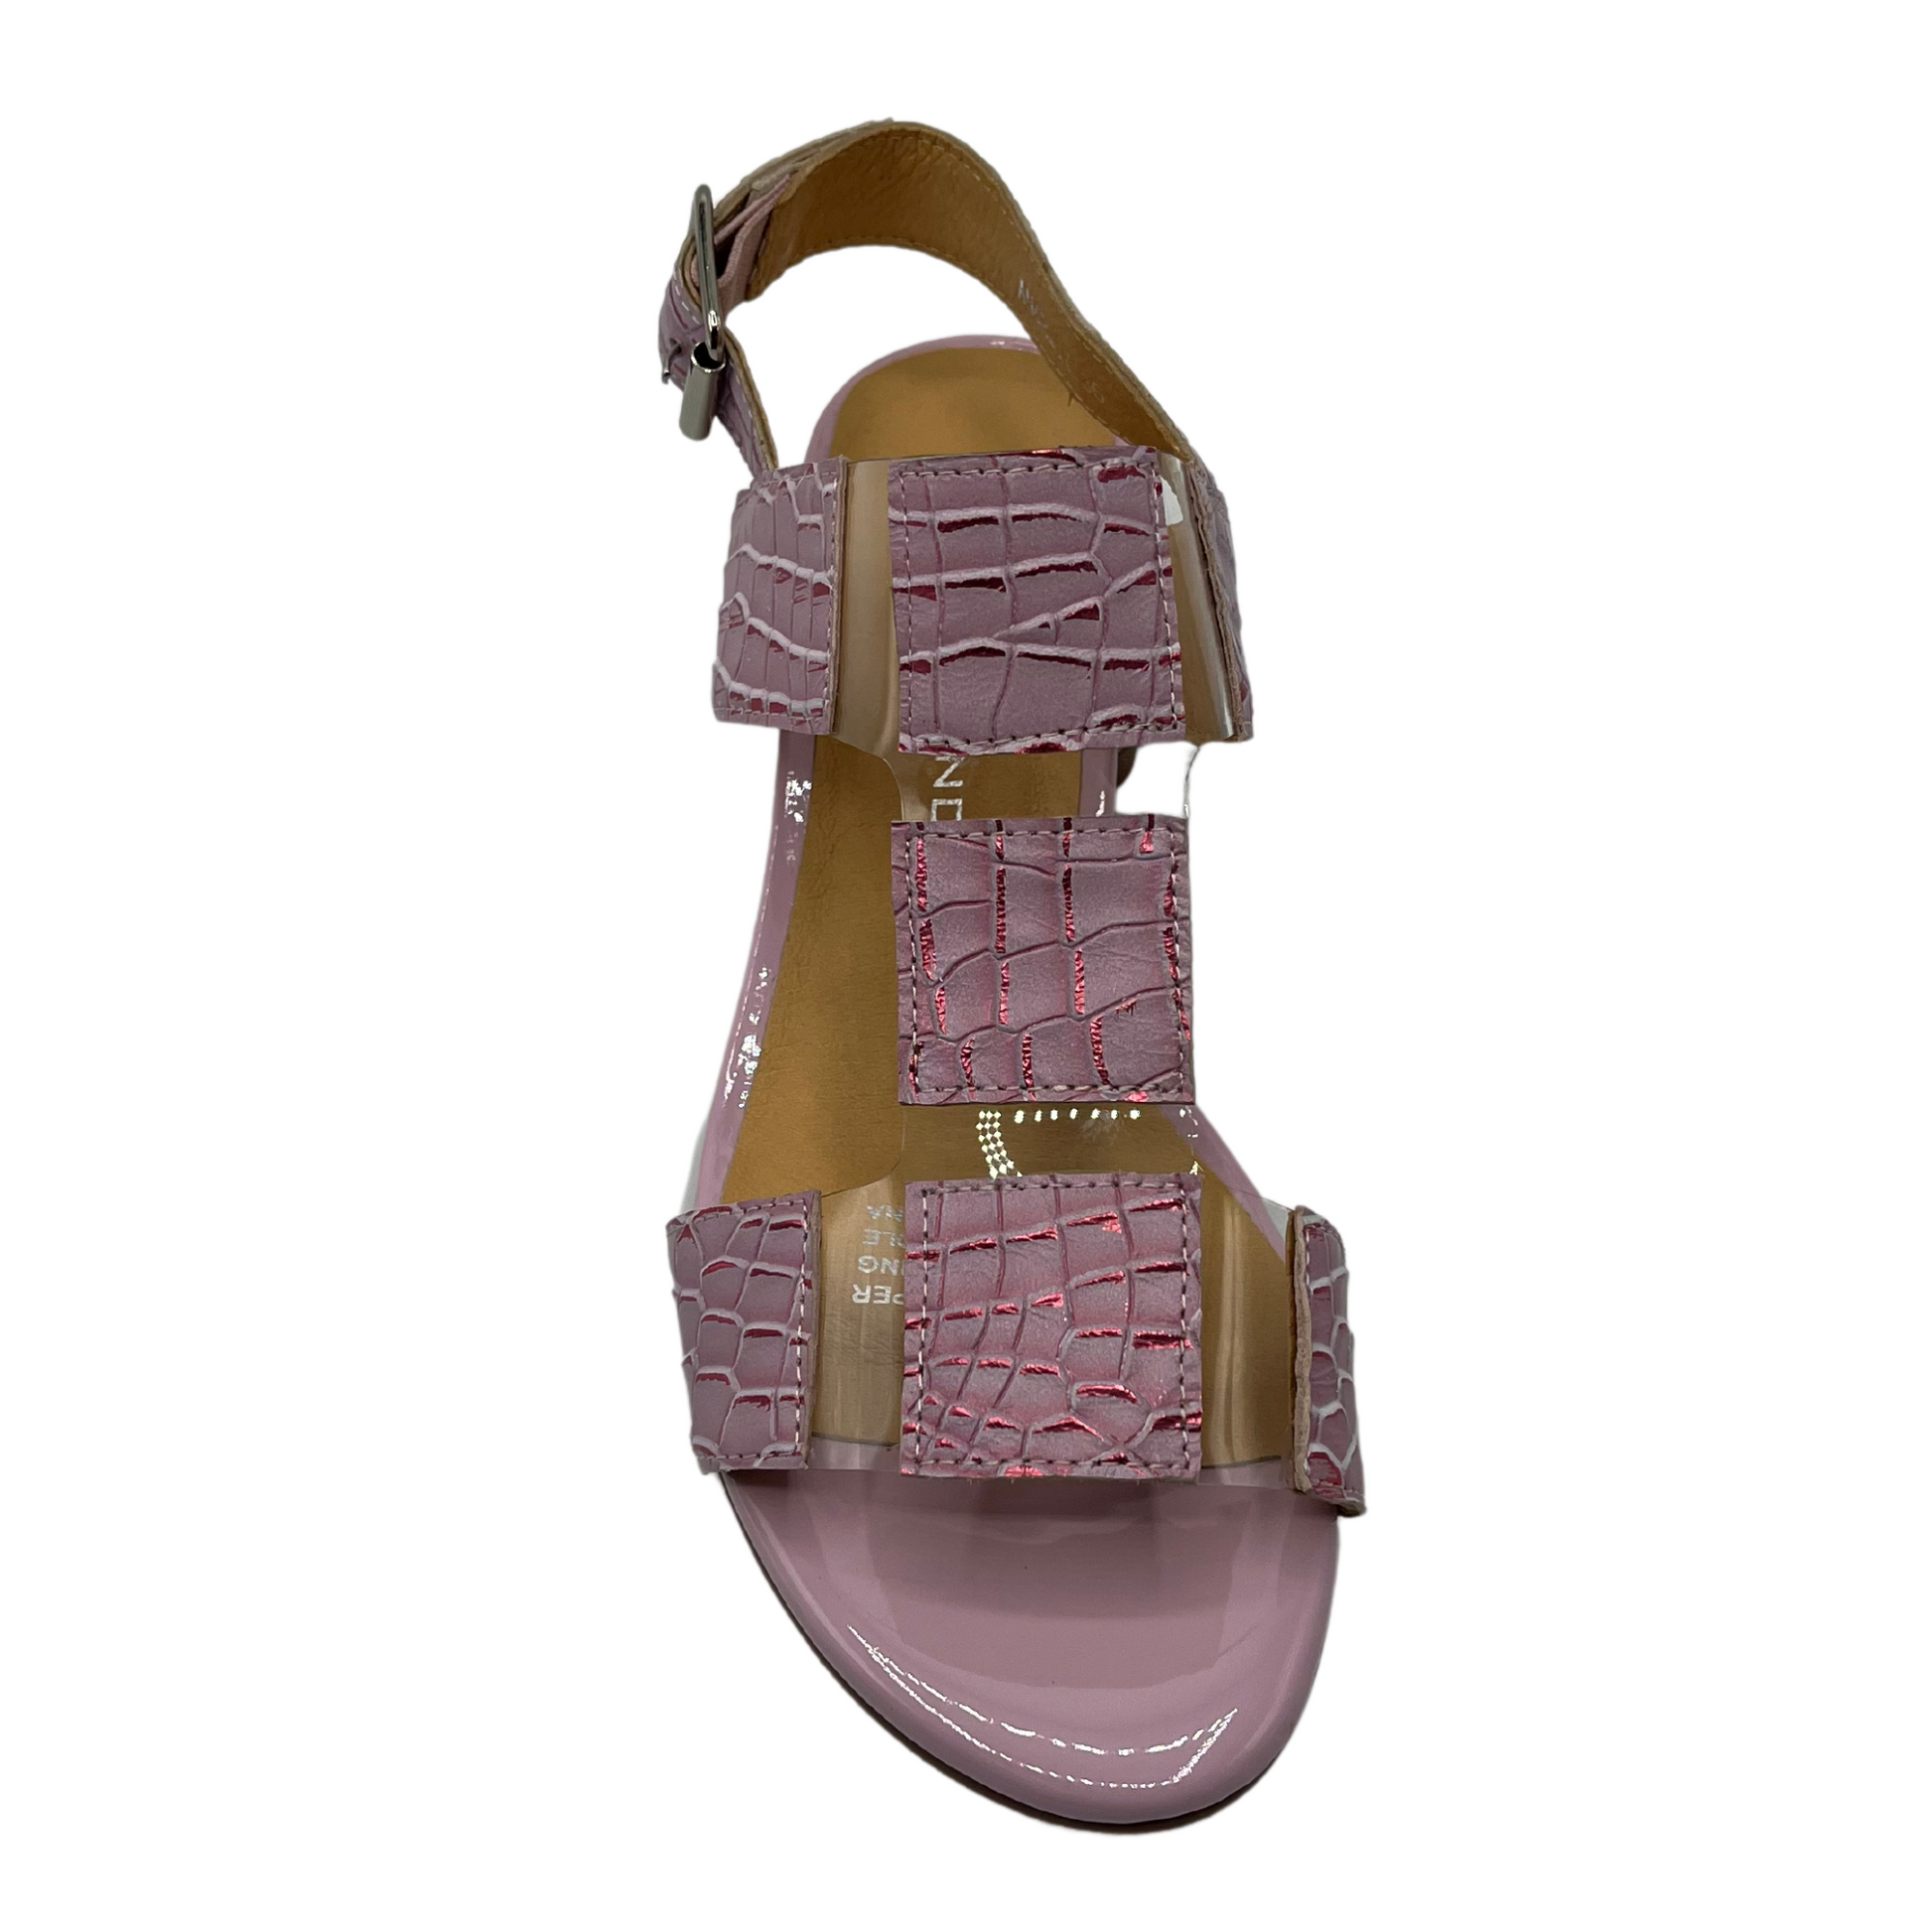 Top view of pink croc print sandal with buckle strap